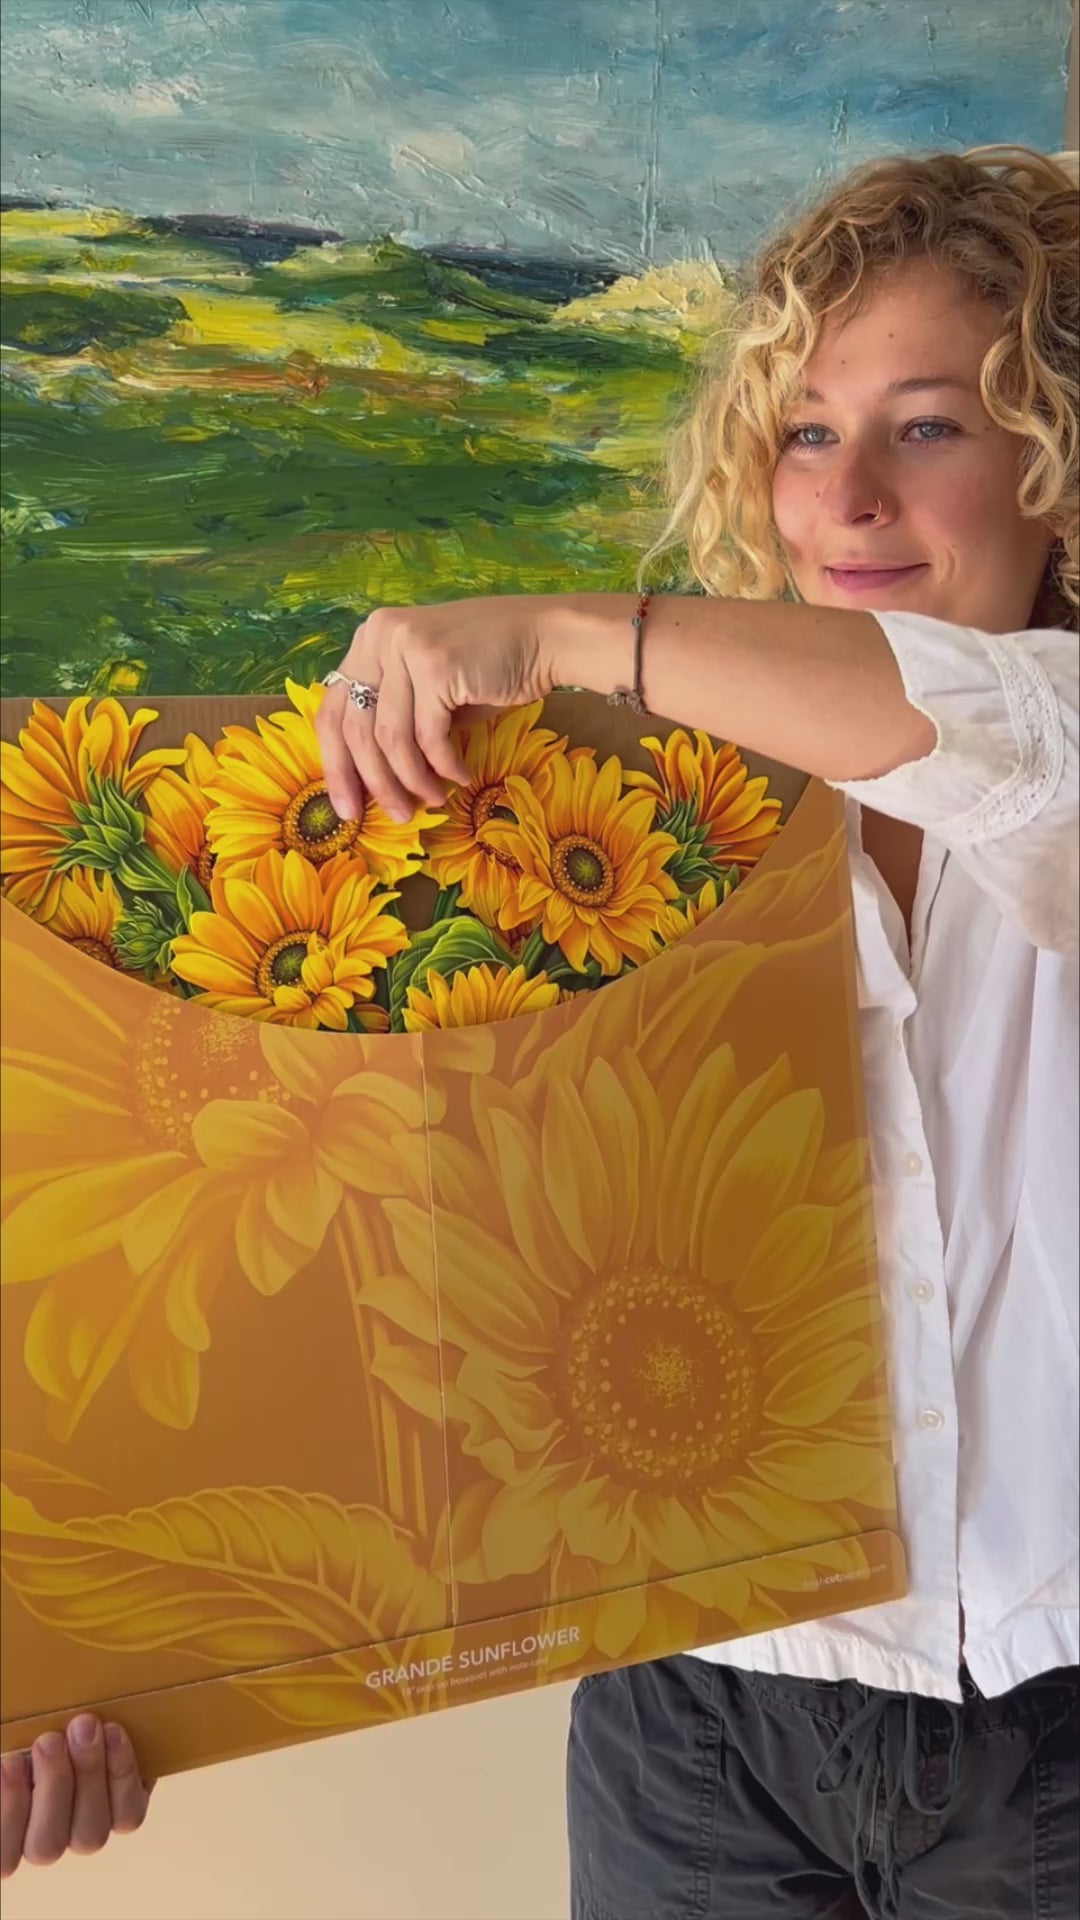 Make a GRAND impression with FreshCut Paper's Sunflower Grande! These festive blooms measure 17" tall by 15" across. More than a greeting card, our flowers are always FreshCut Paper that never wilt, fade or require water.